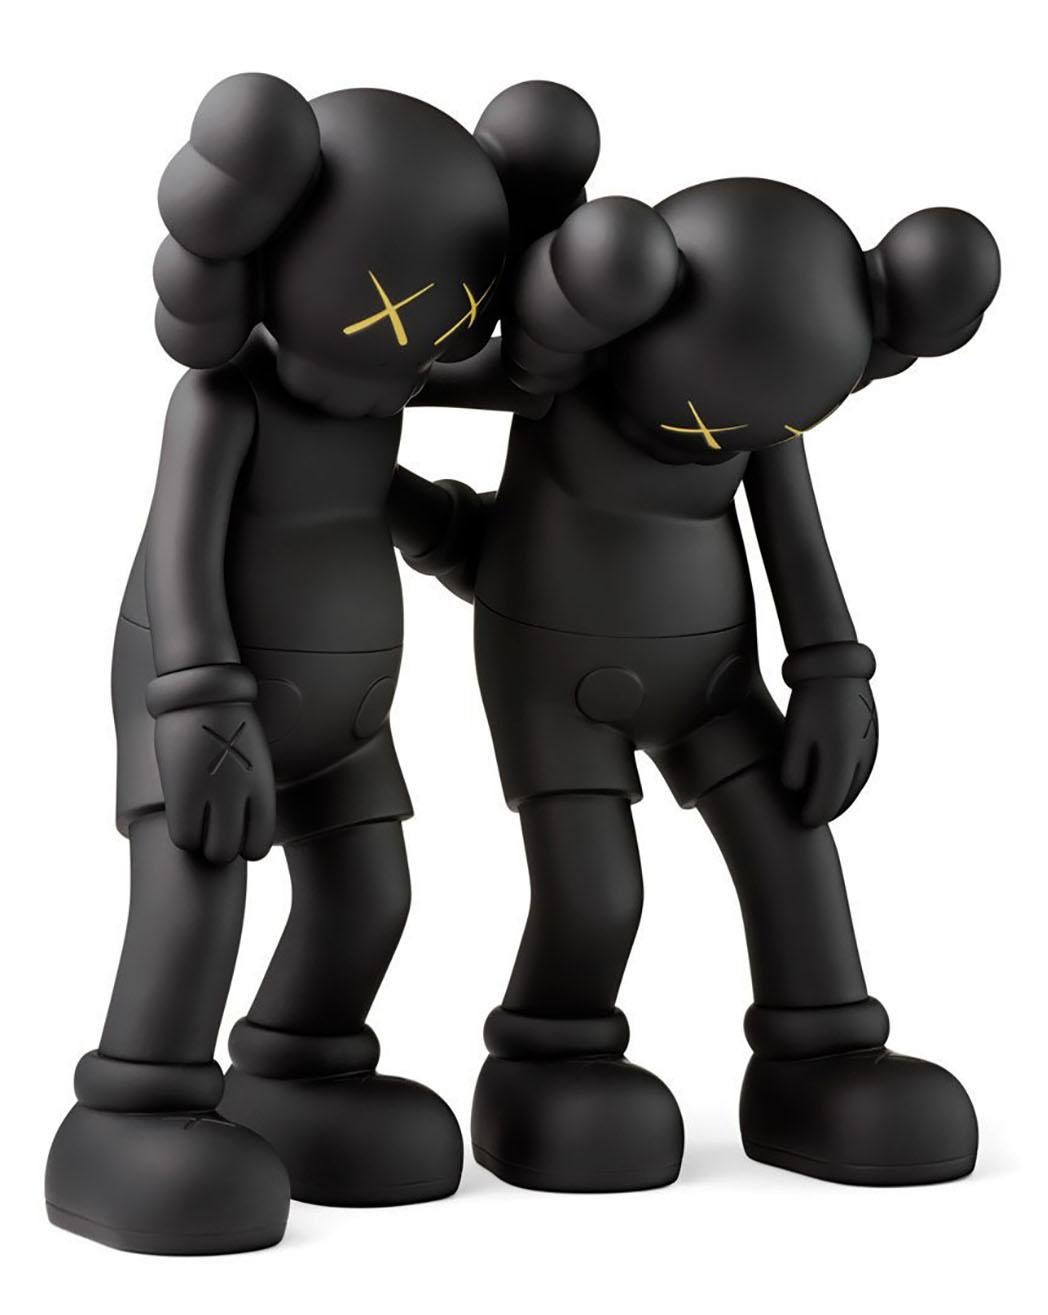 kaws along the way meaning